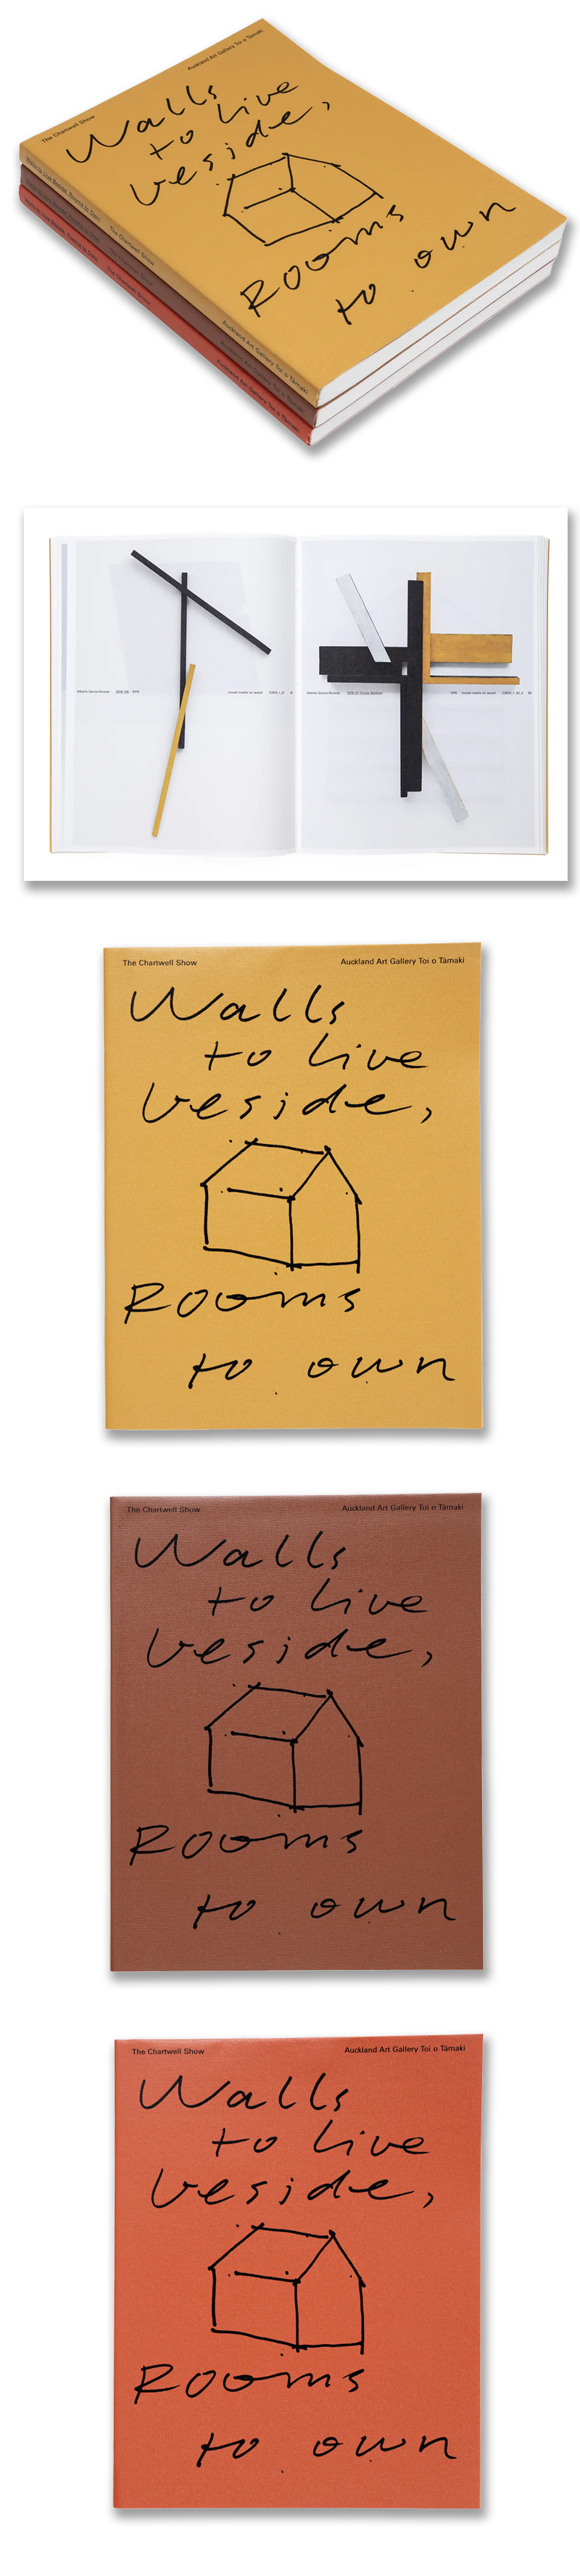 Walls to Live Beside, Rooms to Own